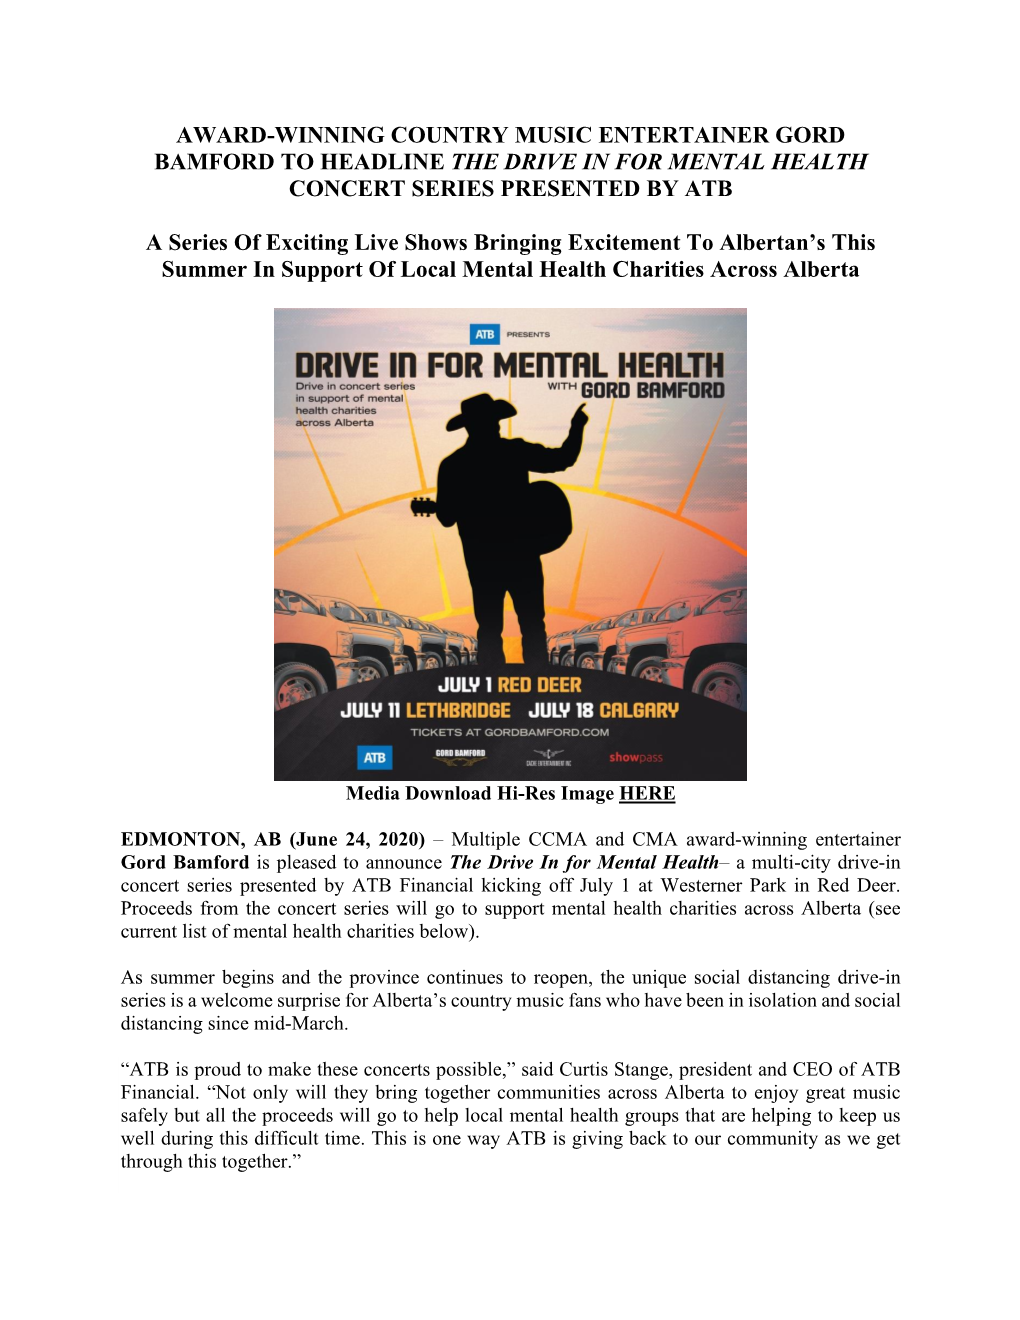 Award-Winning Country Music Entertainer Gord Bamford to Headline the Drive in for Mental Health Concert Series Presented by Atb